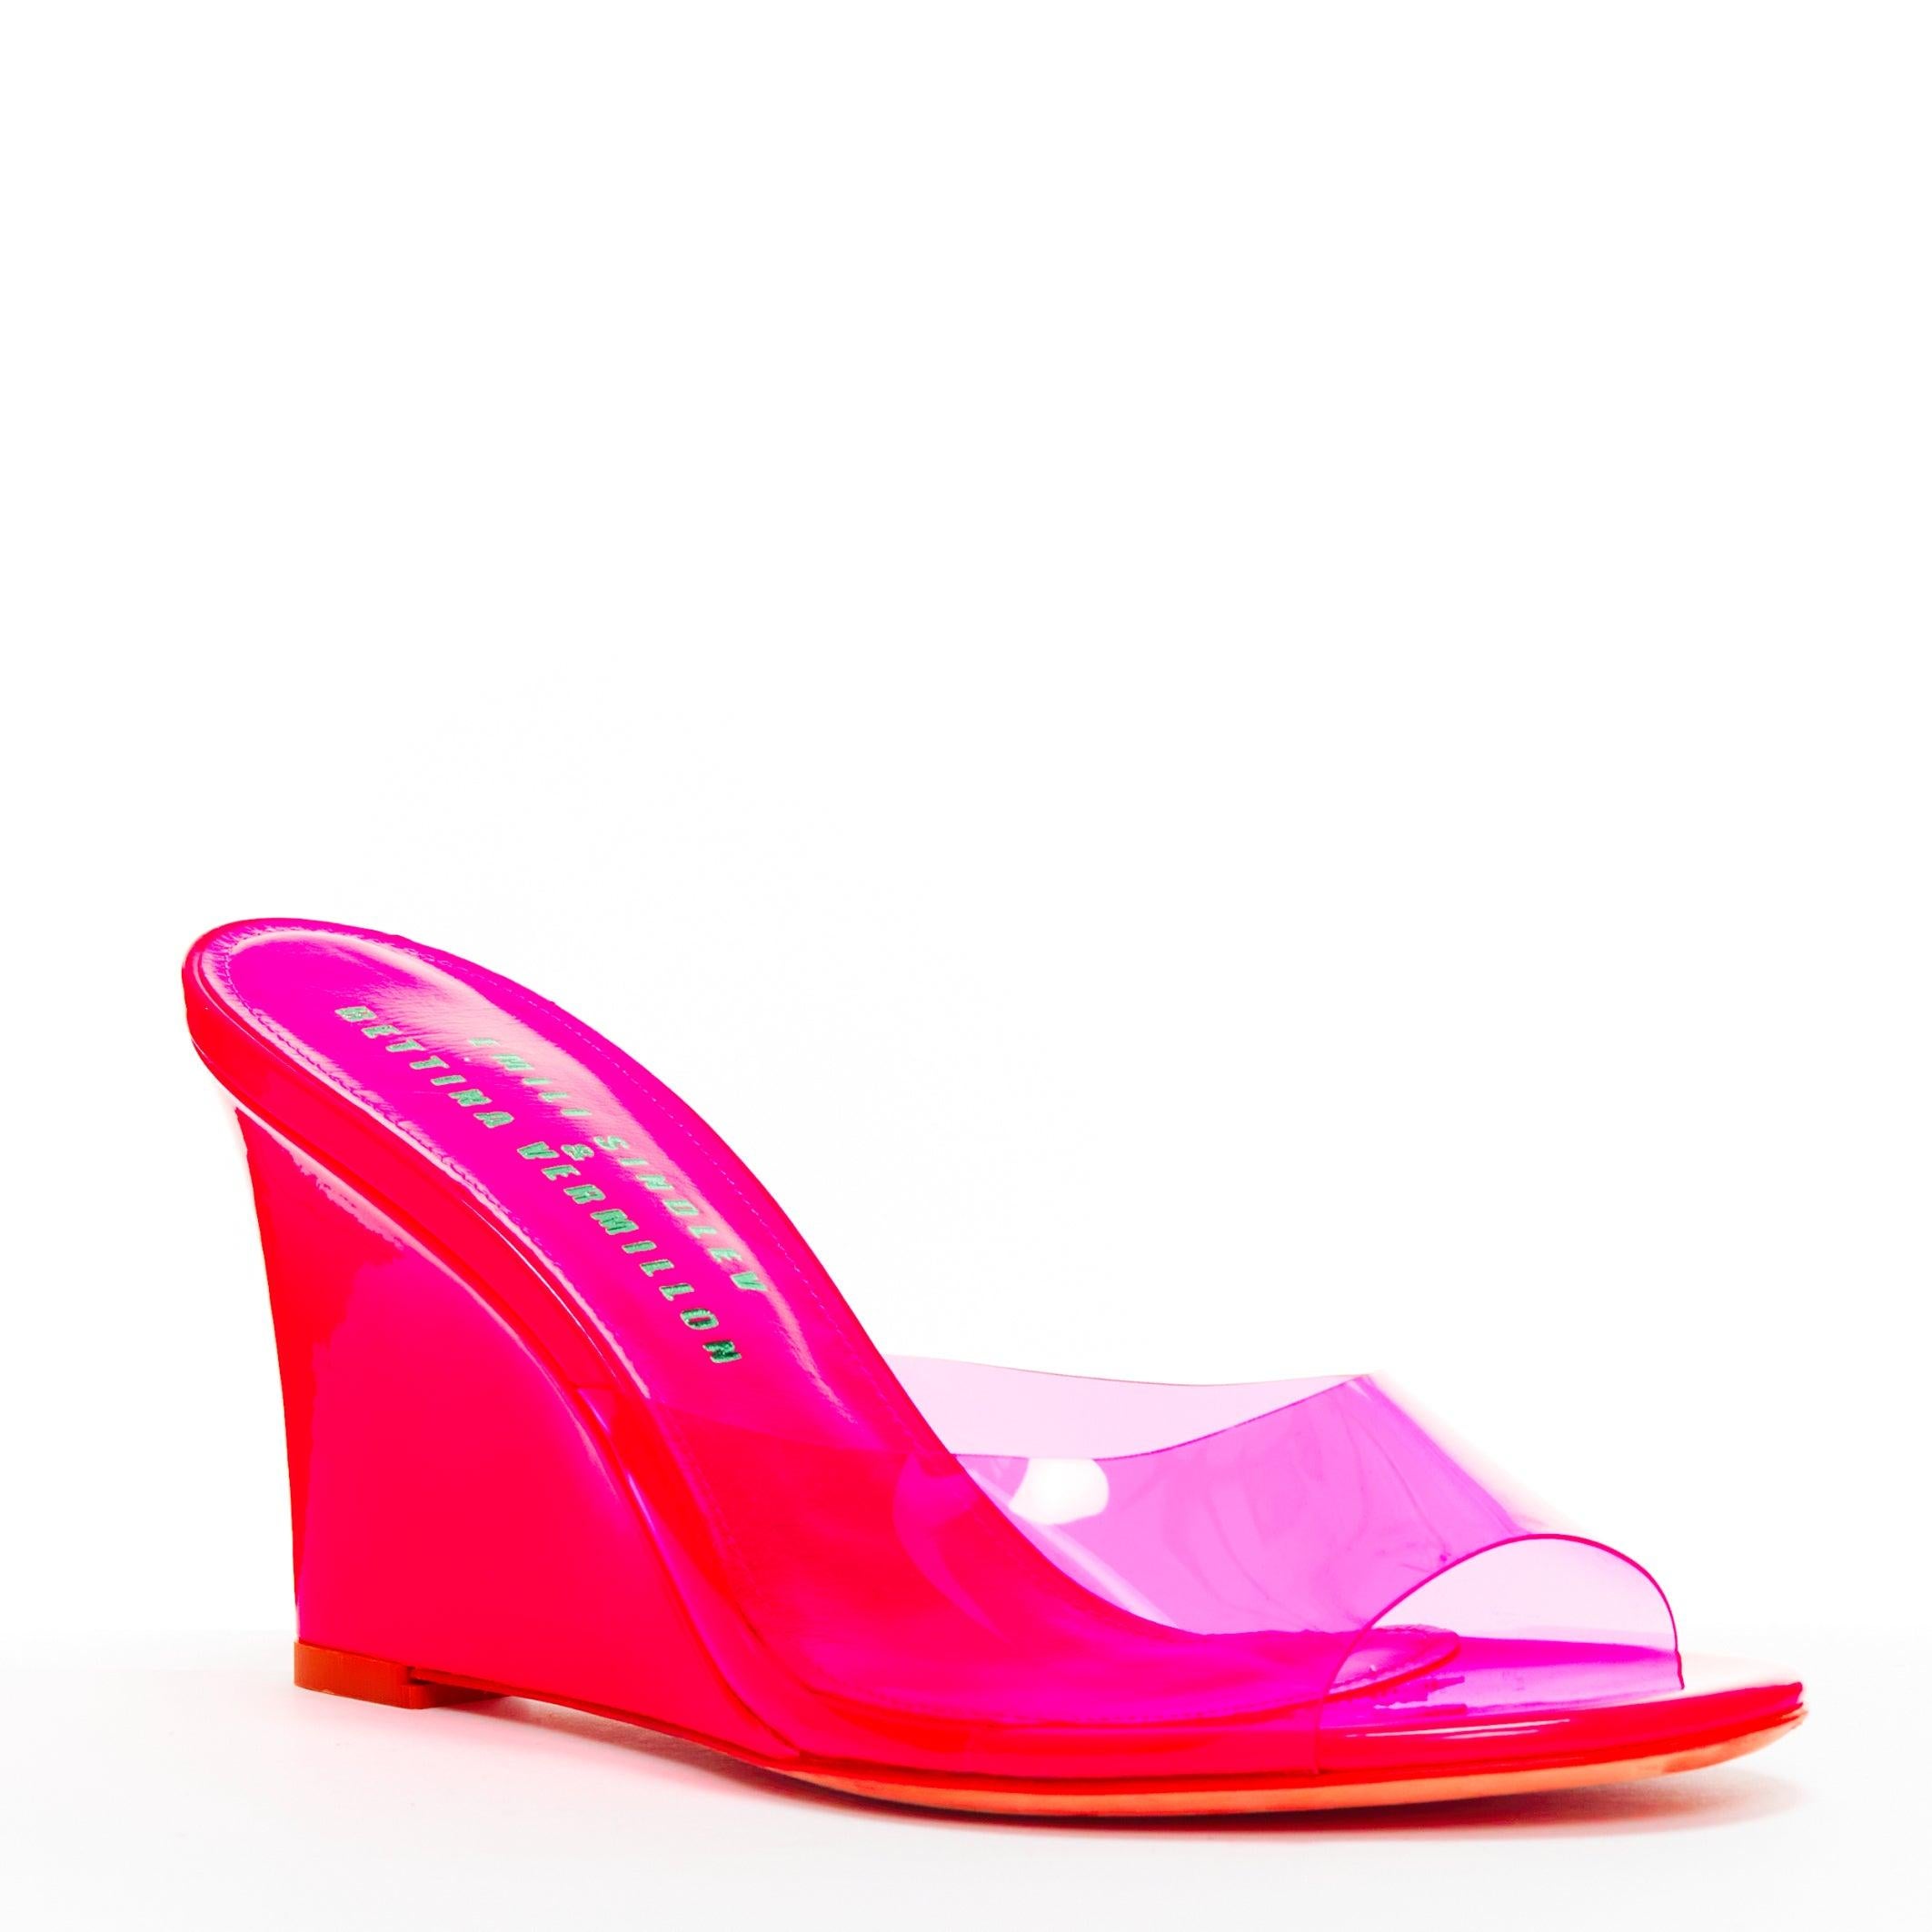 BETTINA VERMILLON Emili Sindlev Britney hot pink PVC wedge mules EU37.5
Reference: LNKO/A02249
Brand: Bettina Vermillon
Model: Britney
Collection: Emili Sindlev
Material: Leather, PVC
Color: Neon Pink, Pink
Pattern: Solid
Closure: Slip On
Lining: